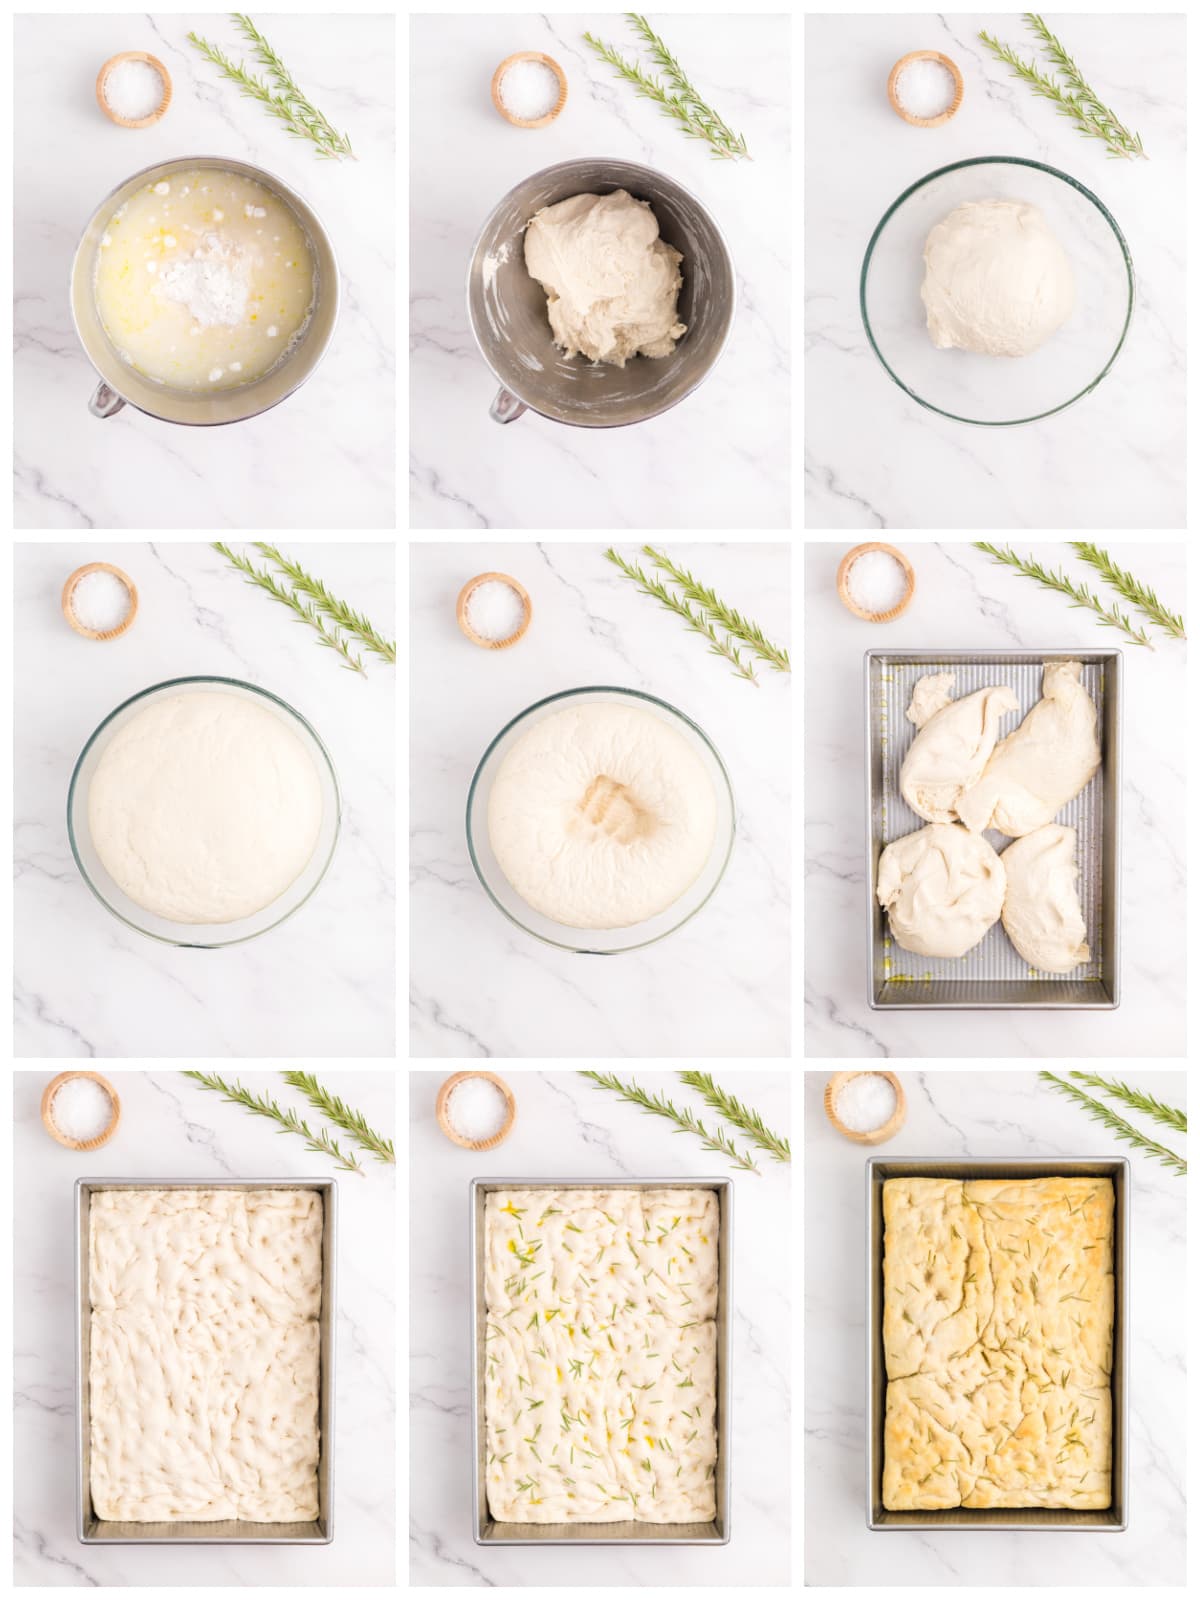 Step by step photos on how to make Rosemary Focaccia Bread.